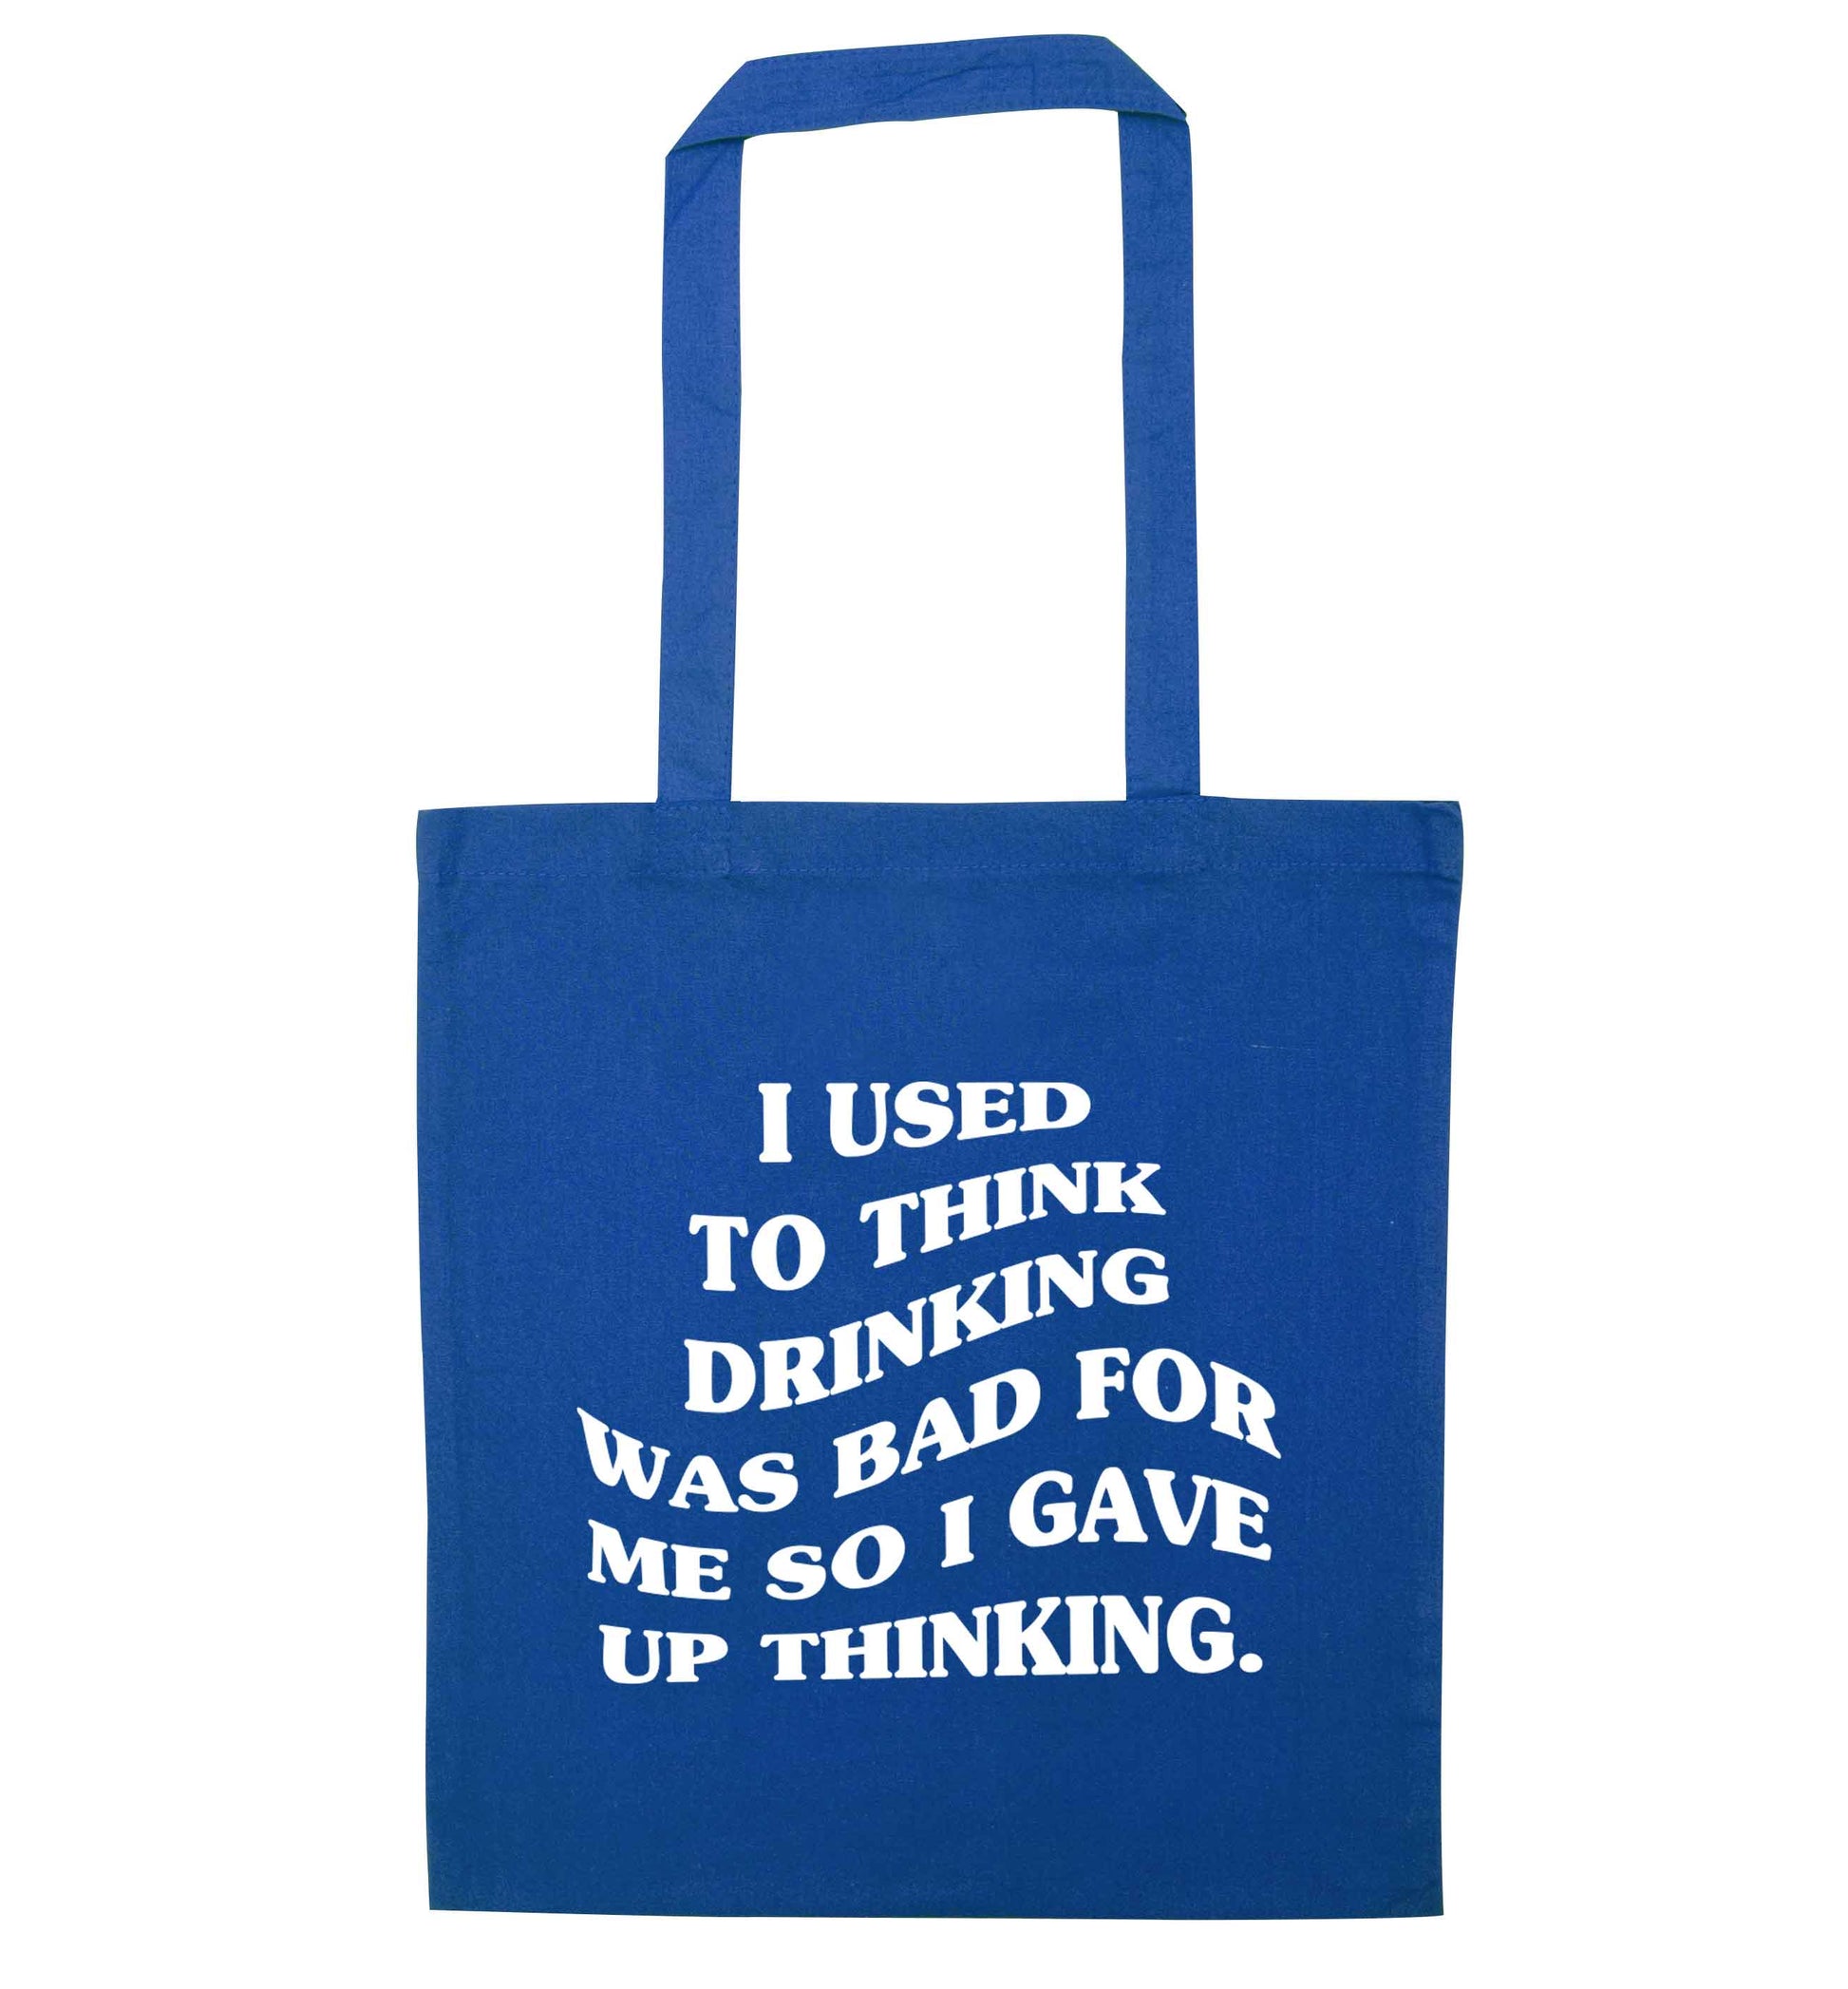 I used to think drinking was bad so I gave up thinking blue tote bag